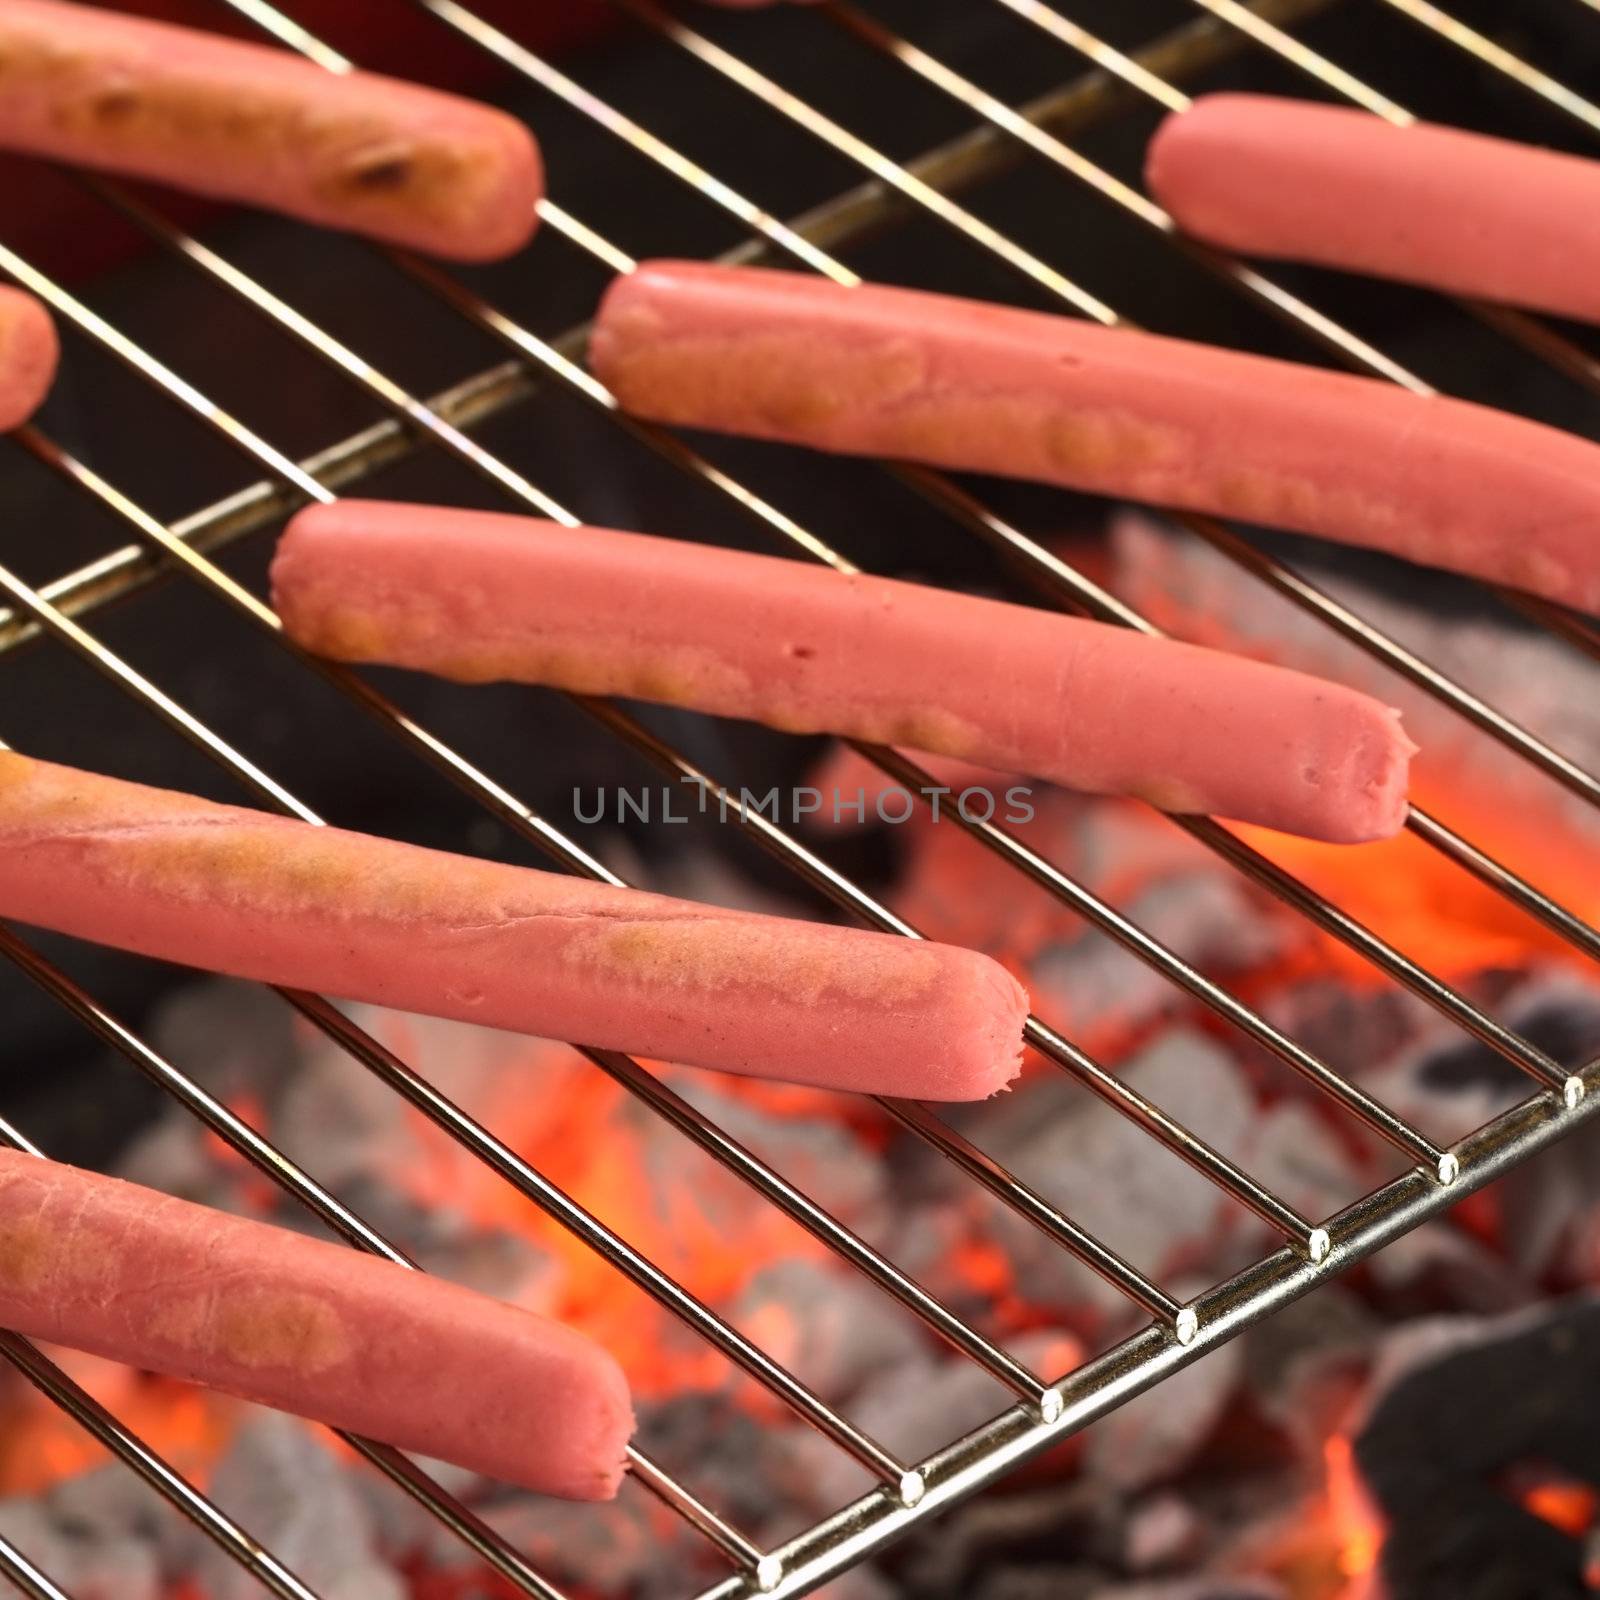 Grilling sausages on barbecue with glowing charcoal below (Selective Focus, Focus on the right end of the second sausage from below)